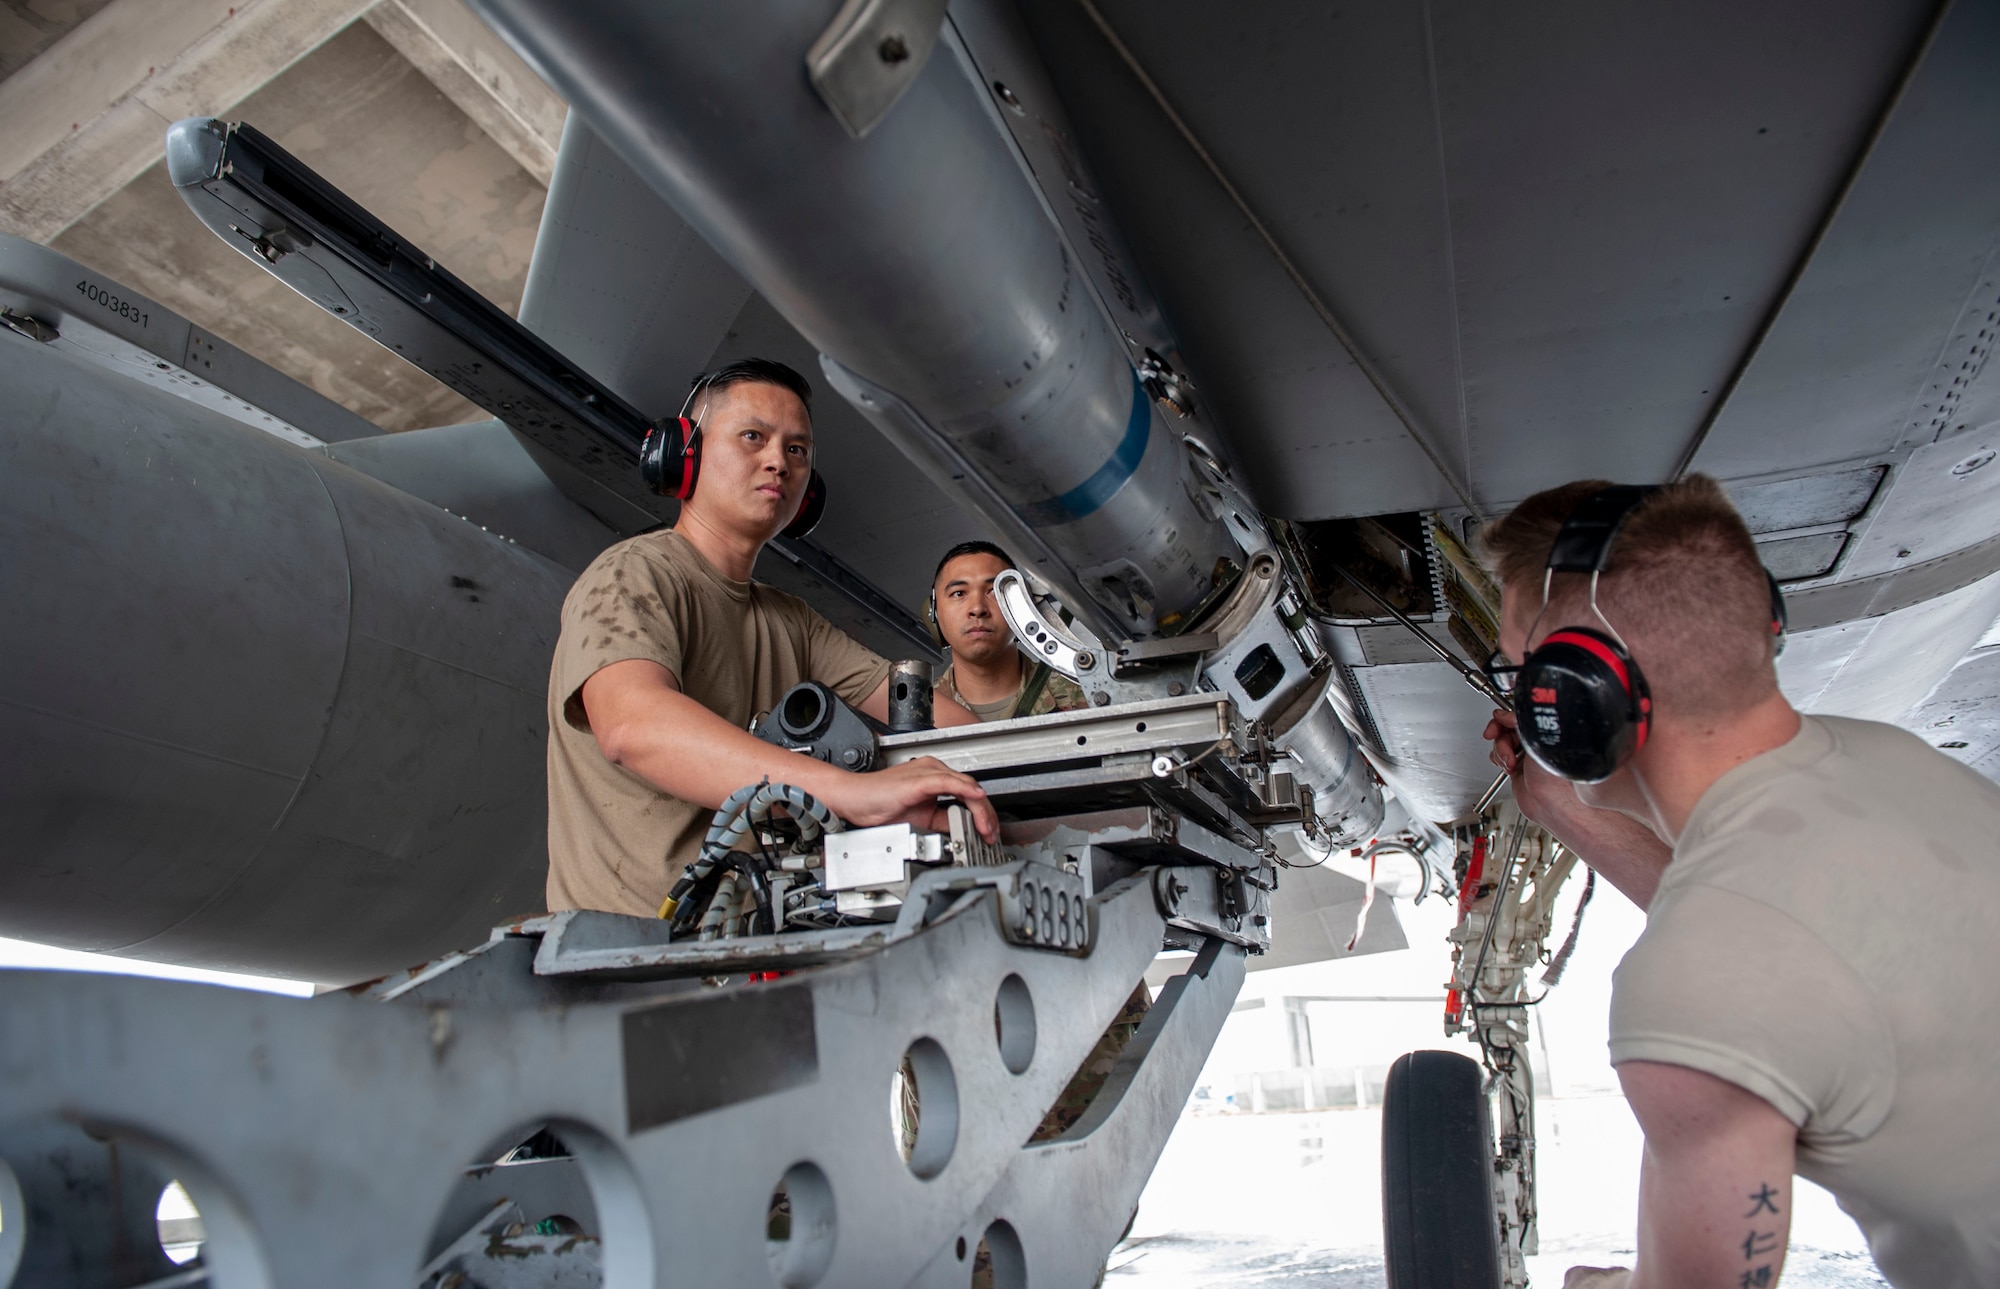 U.S. Air Force Staff Sgt. Chinh Nguyen (left), 67th Aircraft Maintenance Unit load crew chief, and Airman 1st Class Daniel Wolf (right), 67th AMU load crew member, secure an AIM-120 advanced medium-range air-to-air missile onto an F-15C Eagle aircraft during the annual weapons load competition at Kadena Air Base, Japan, Jan. 17, 2020. Each team must load the munition onto an F-15C Eagle aircraft with speed and precision. (U.S. Air Force photo by Naoto Anazawa)